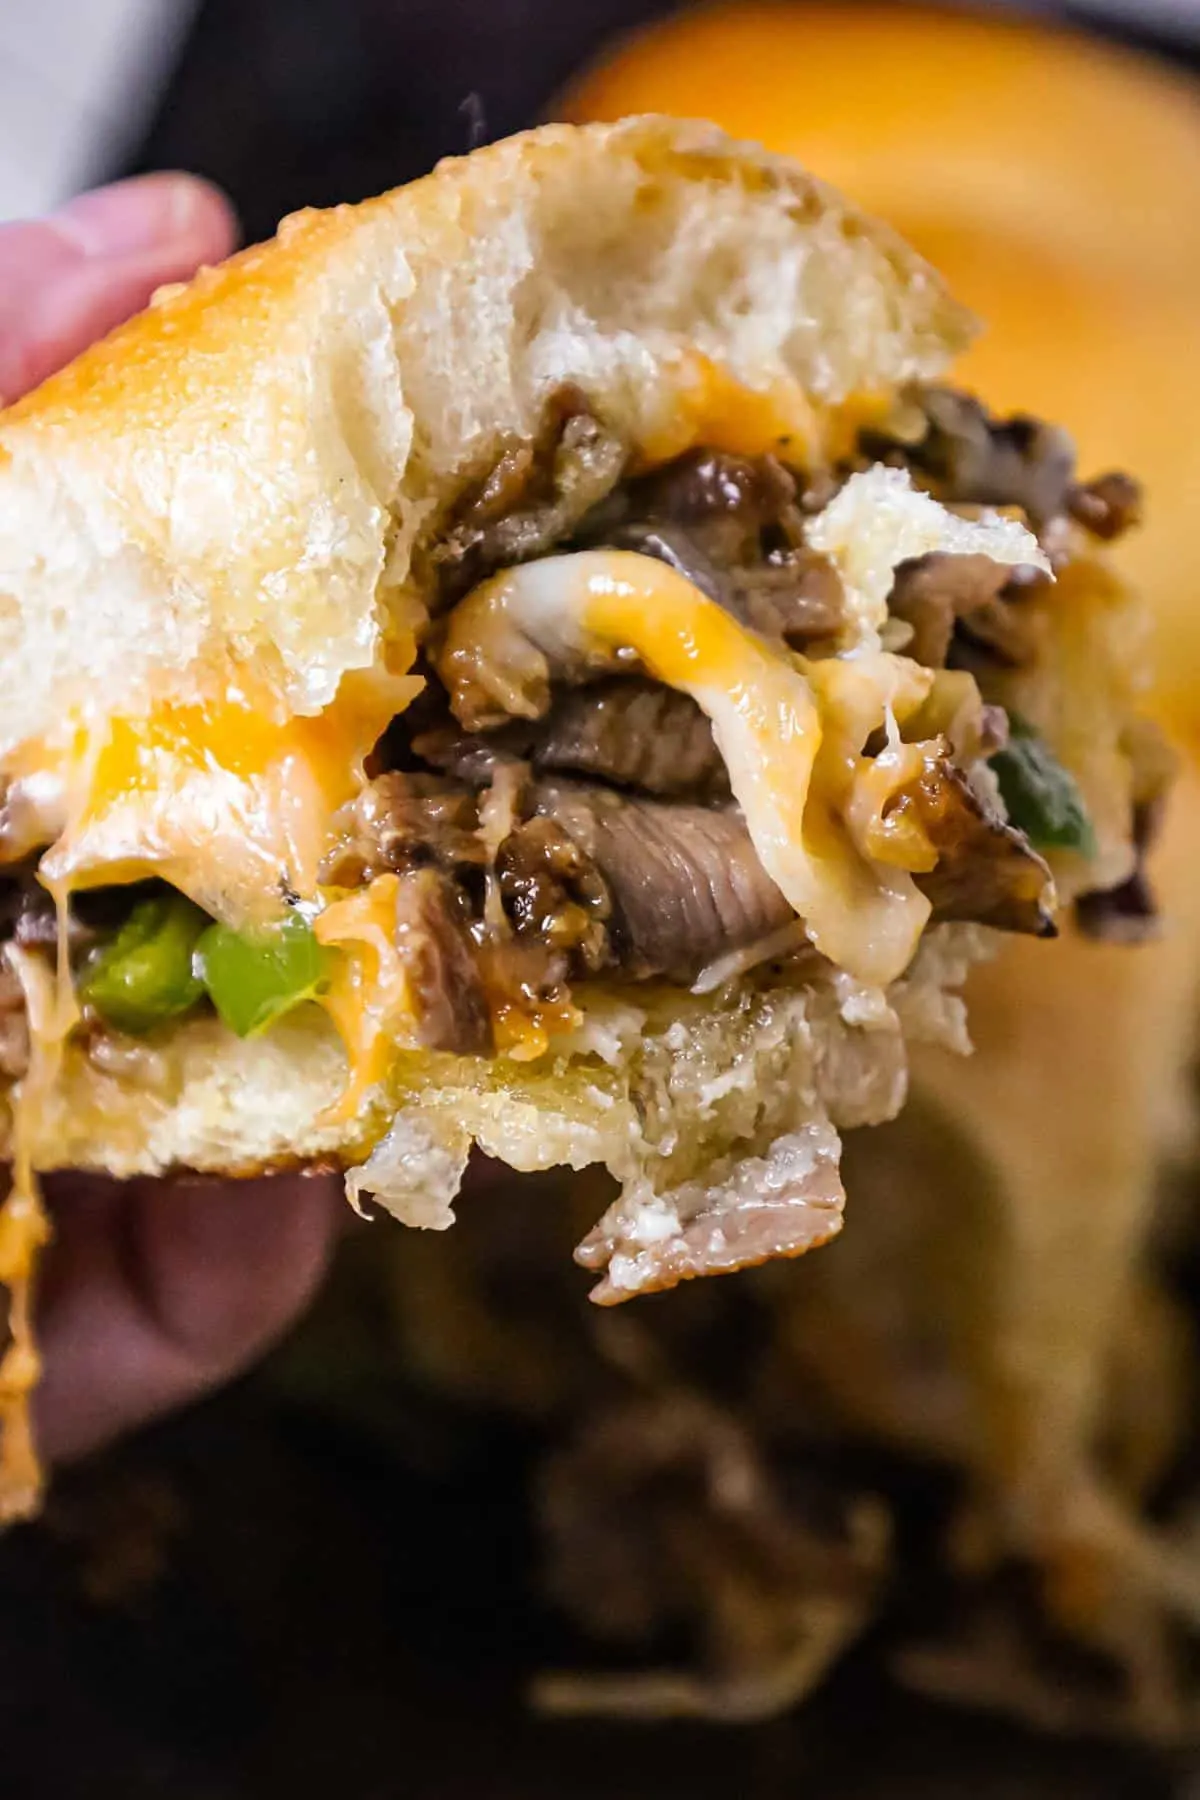 Philly Cheese Steak Sliders are delicious mini sandwiches loaded with chopped roast beef, green peppers, onions and shredded cheese.